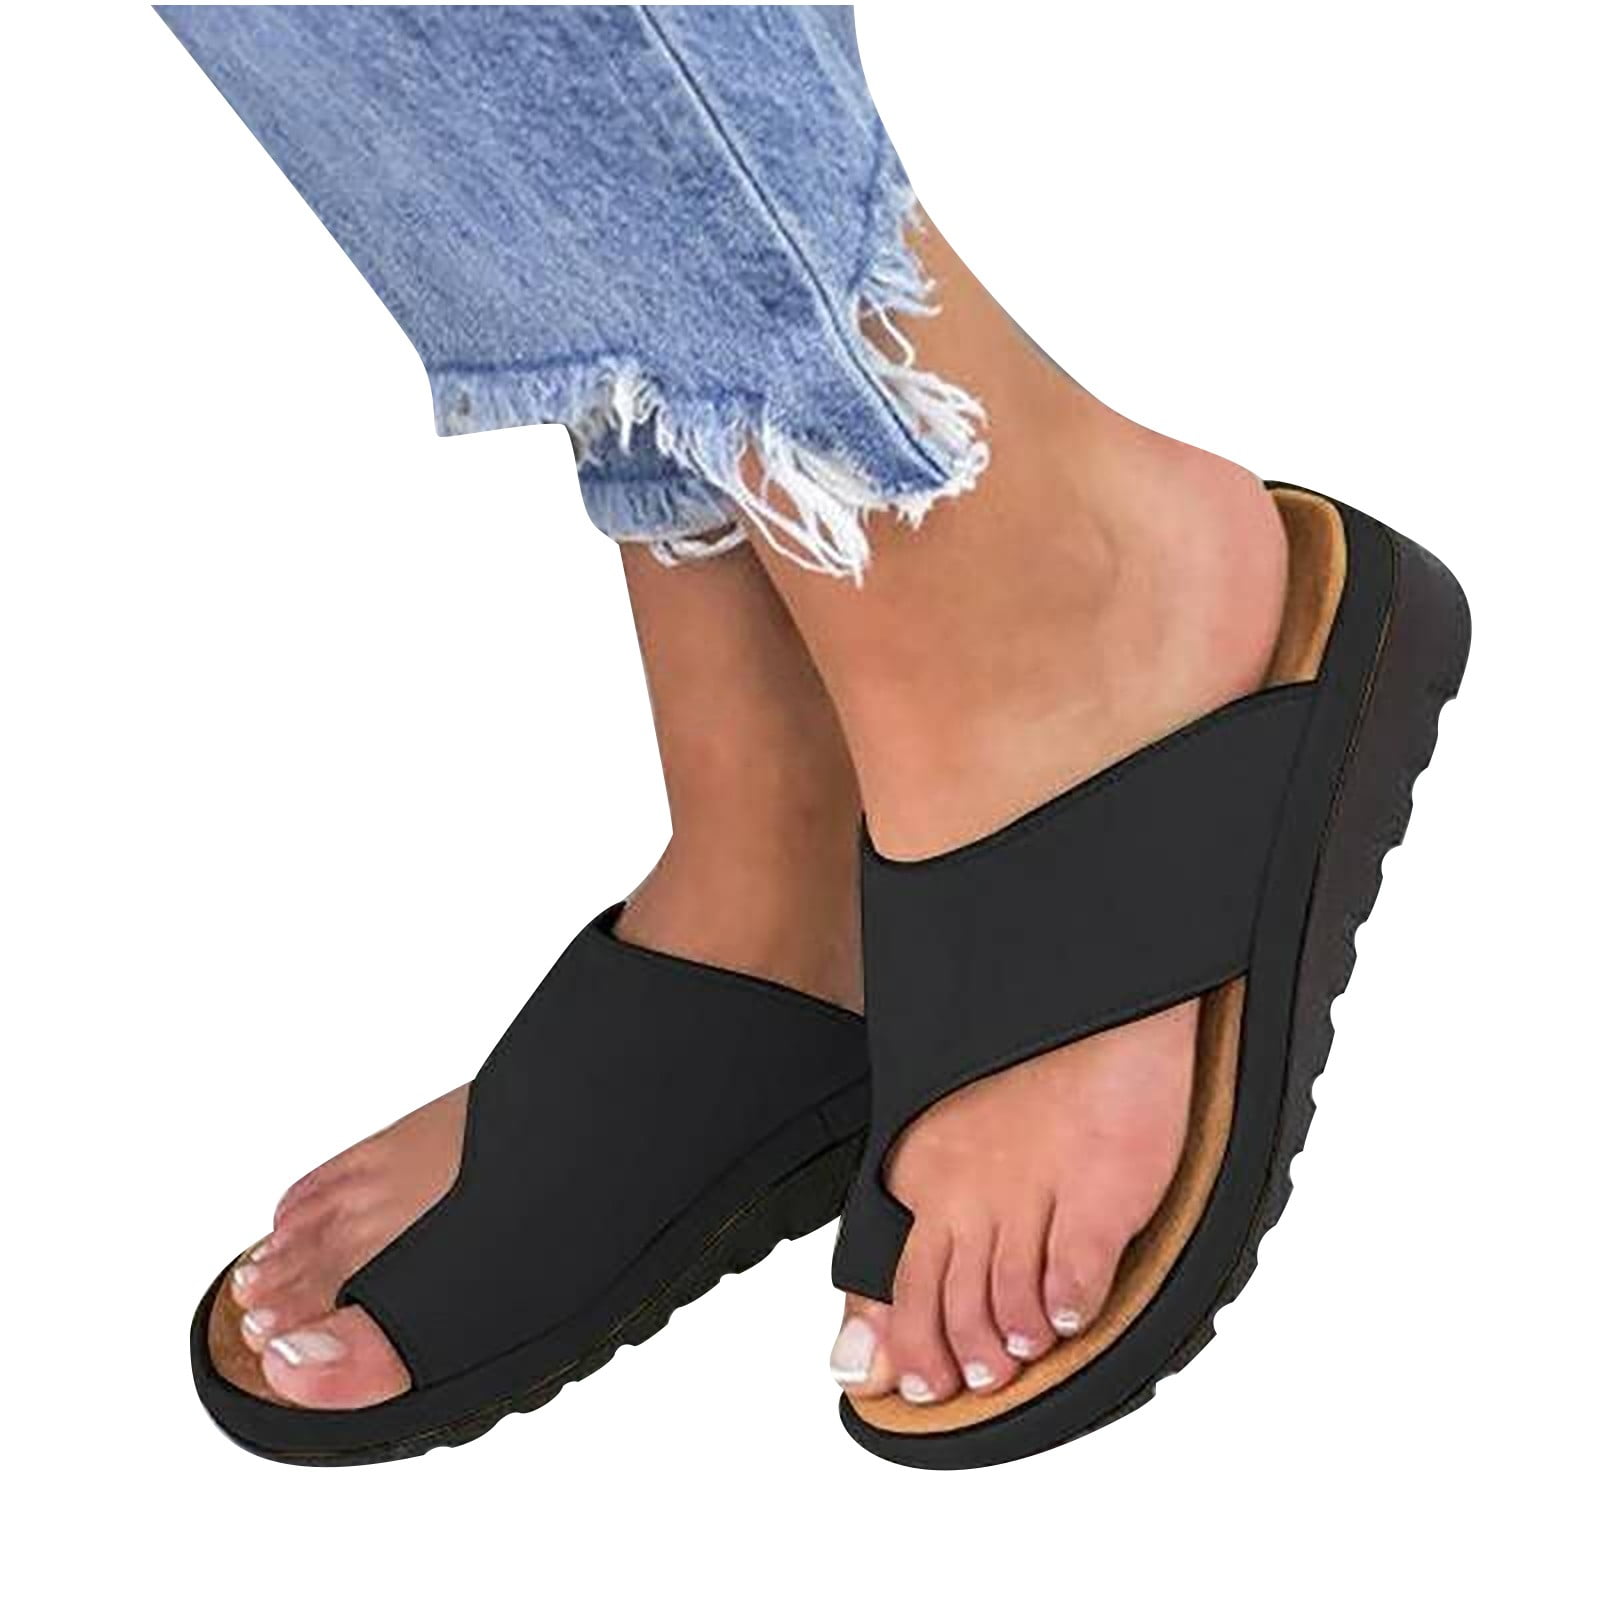 Men's Faux Leather Slipper Flat Chappal Thong Sandal For Daily